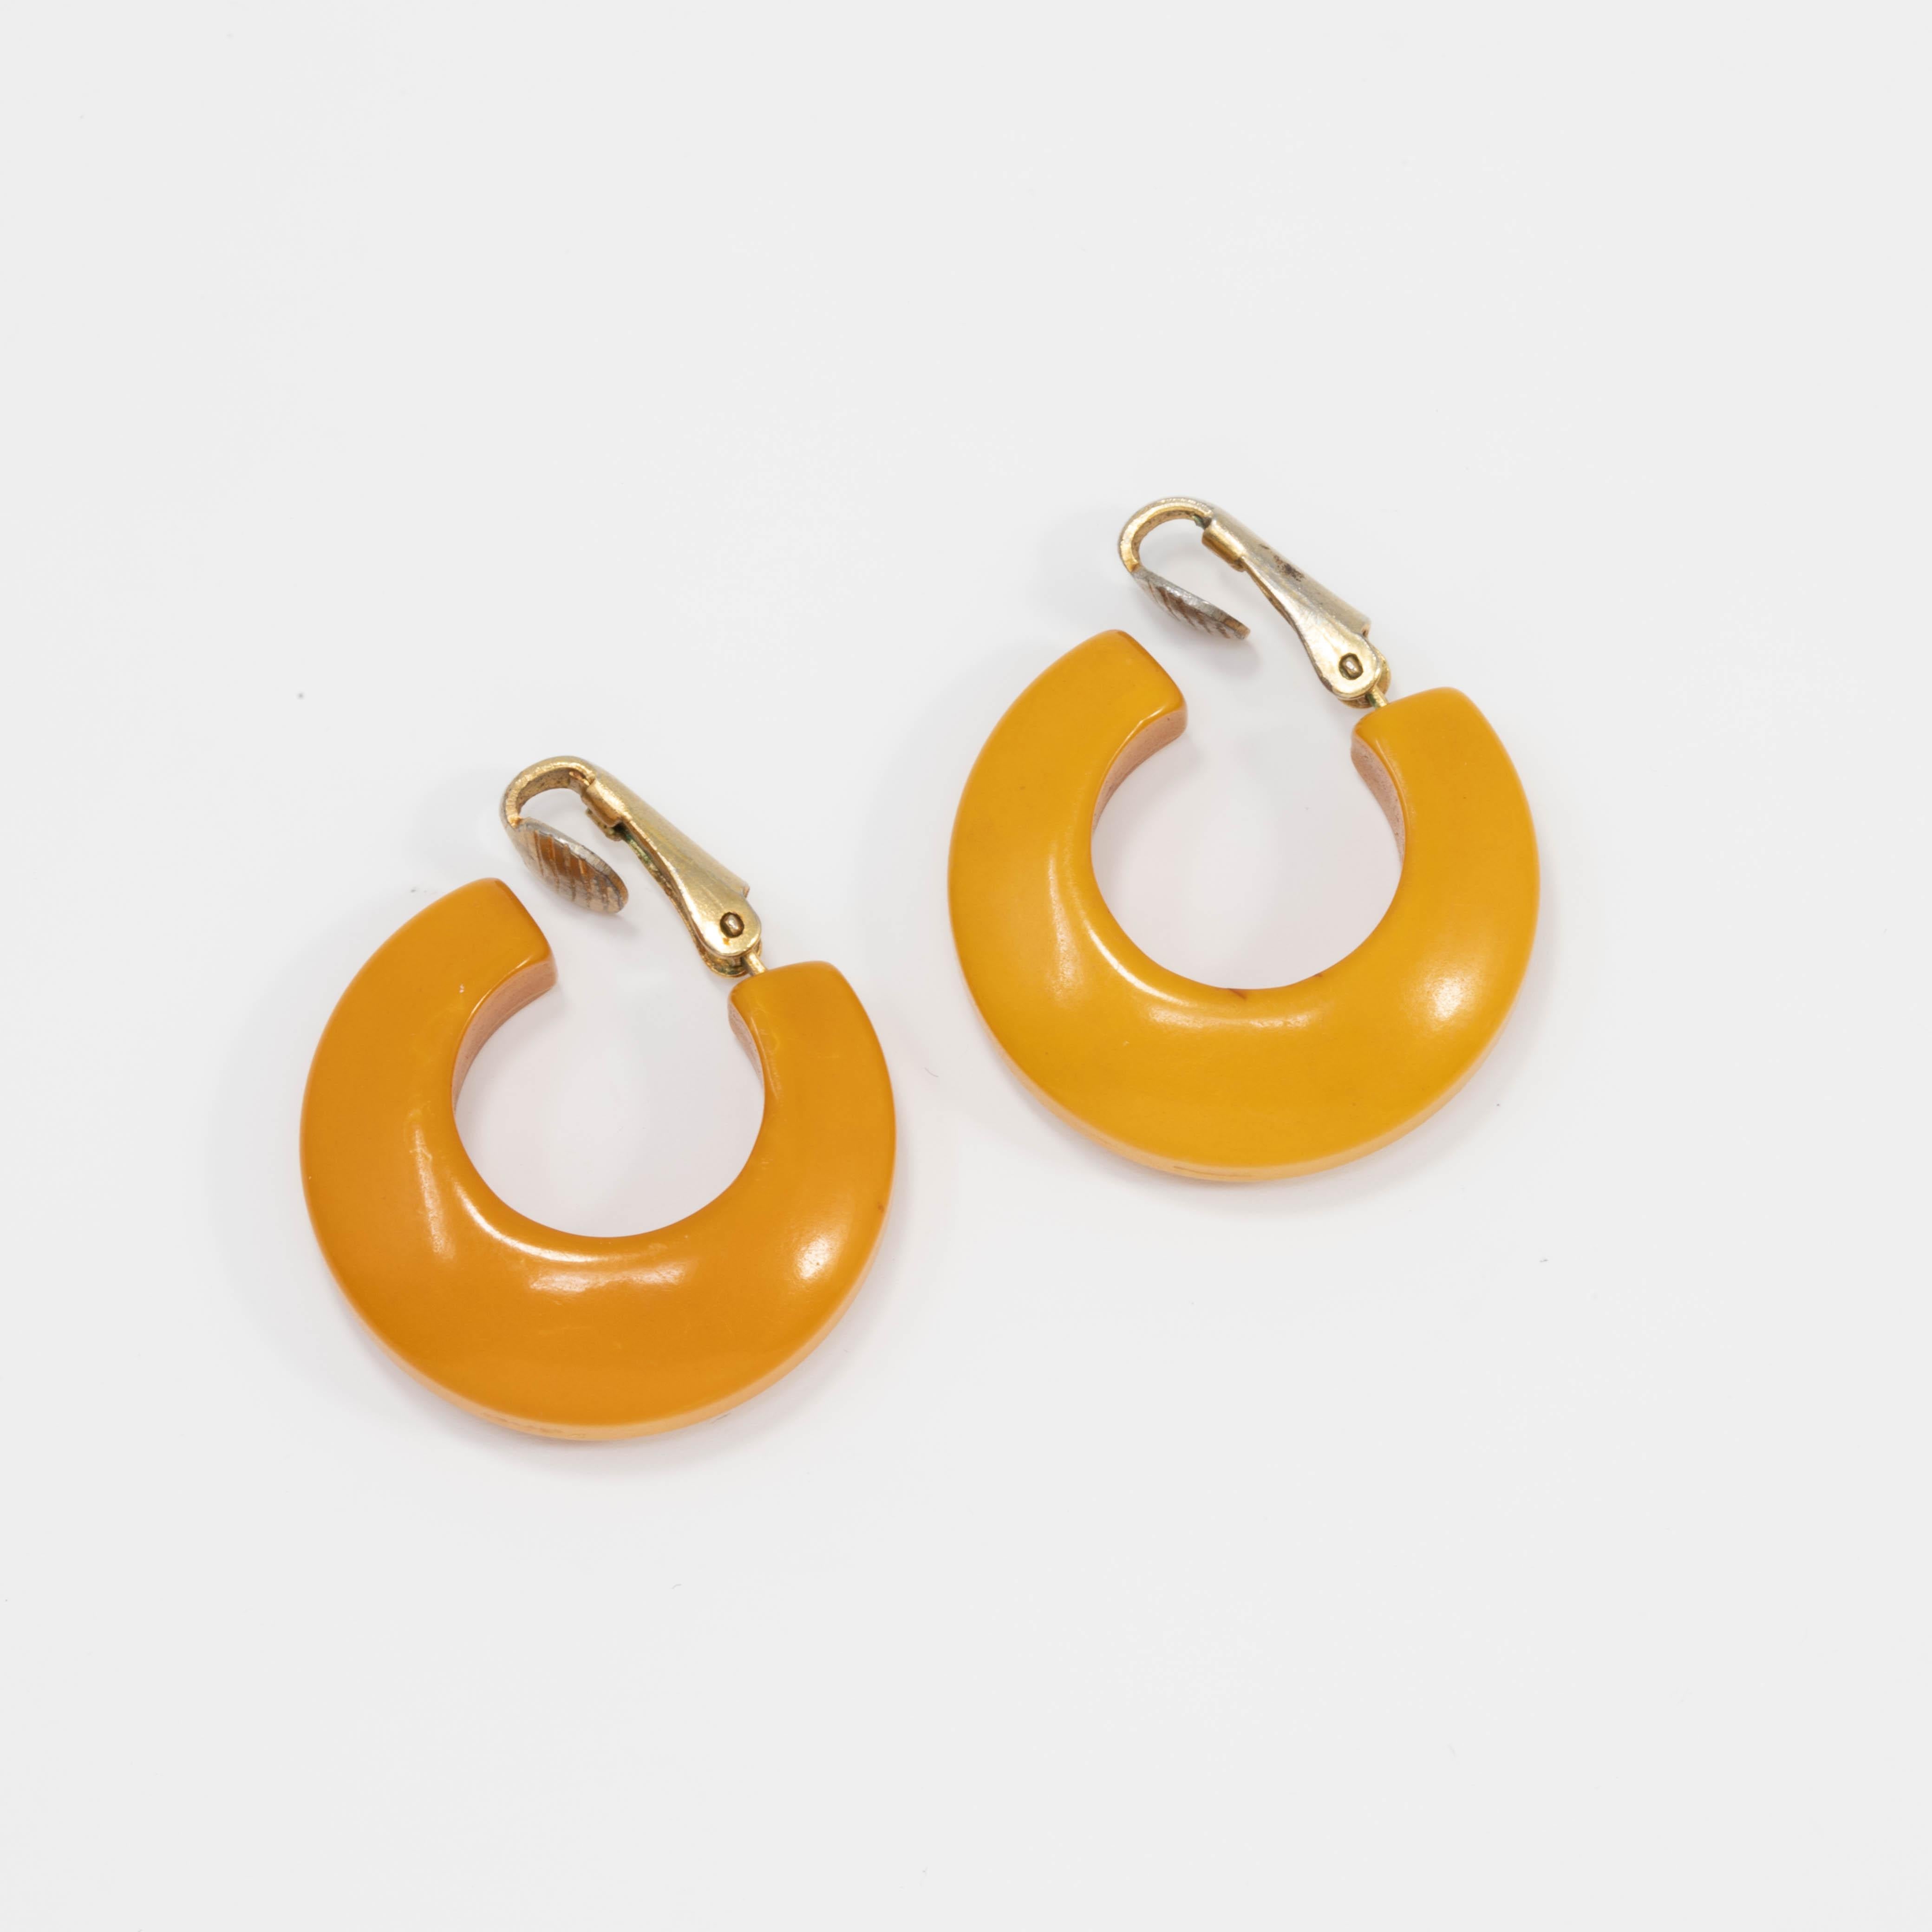 A pair of bright butterscotch yellow huggie earrings. Vintage bakelite with goldtone clip on findings.

Circa early to mid 1900s.